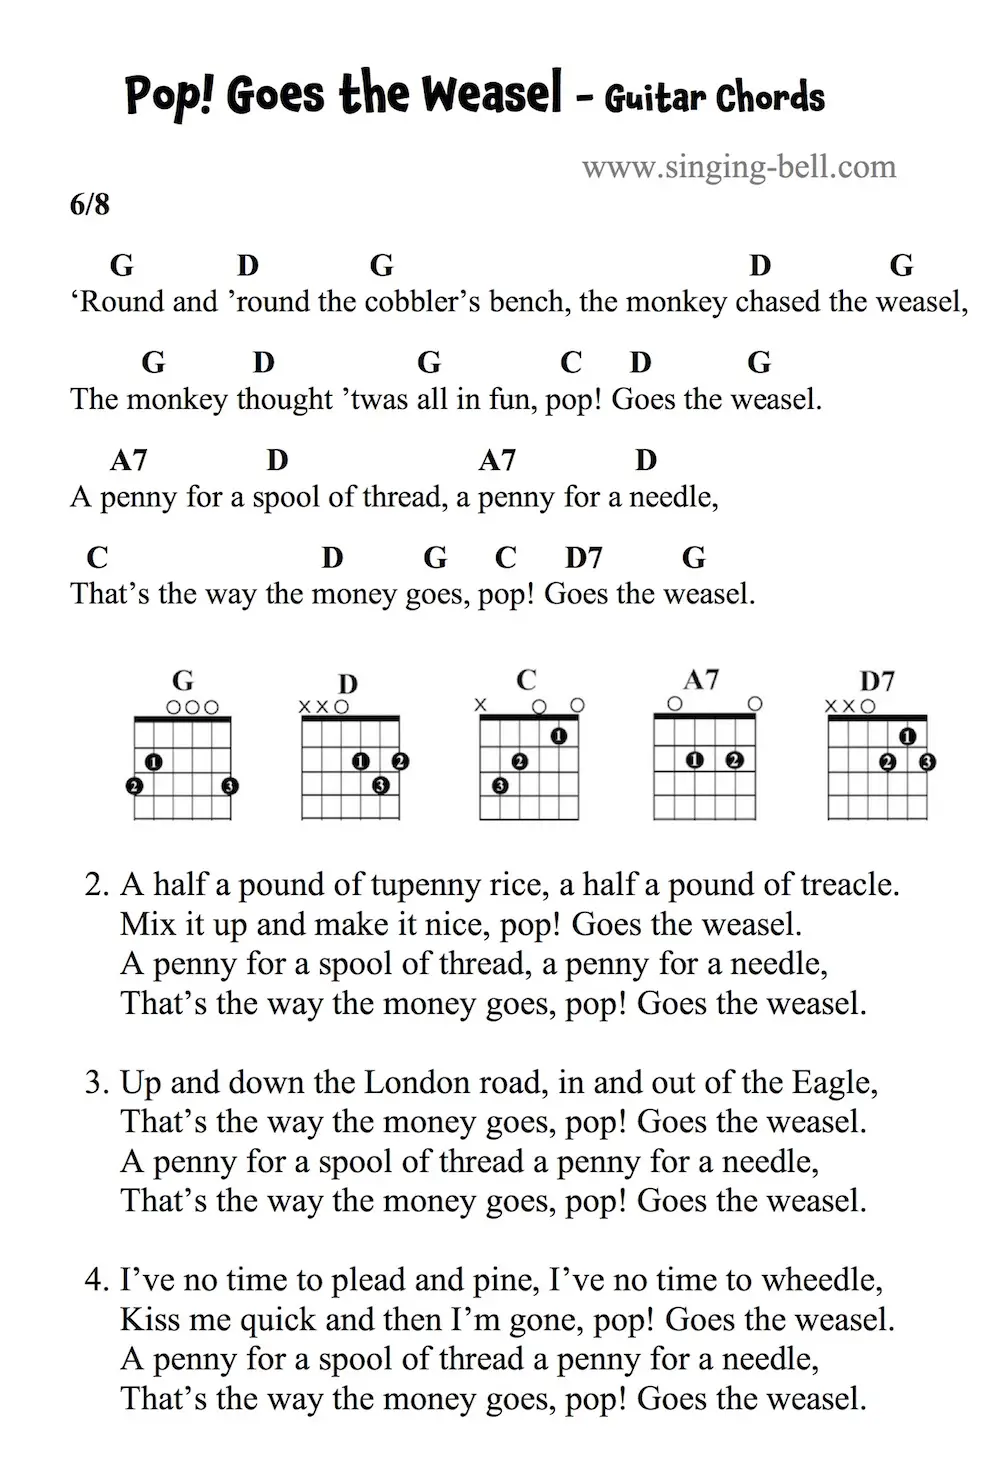 Pop! Goes the Weasel Guitar Chords and Tabs.